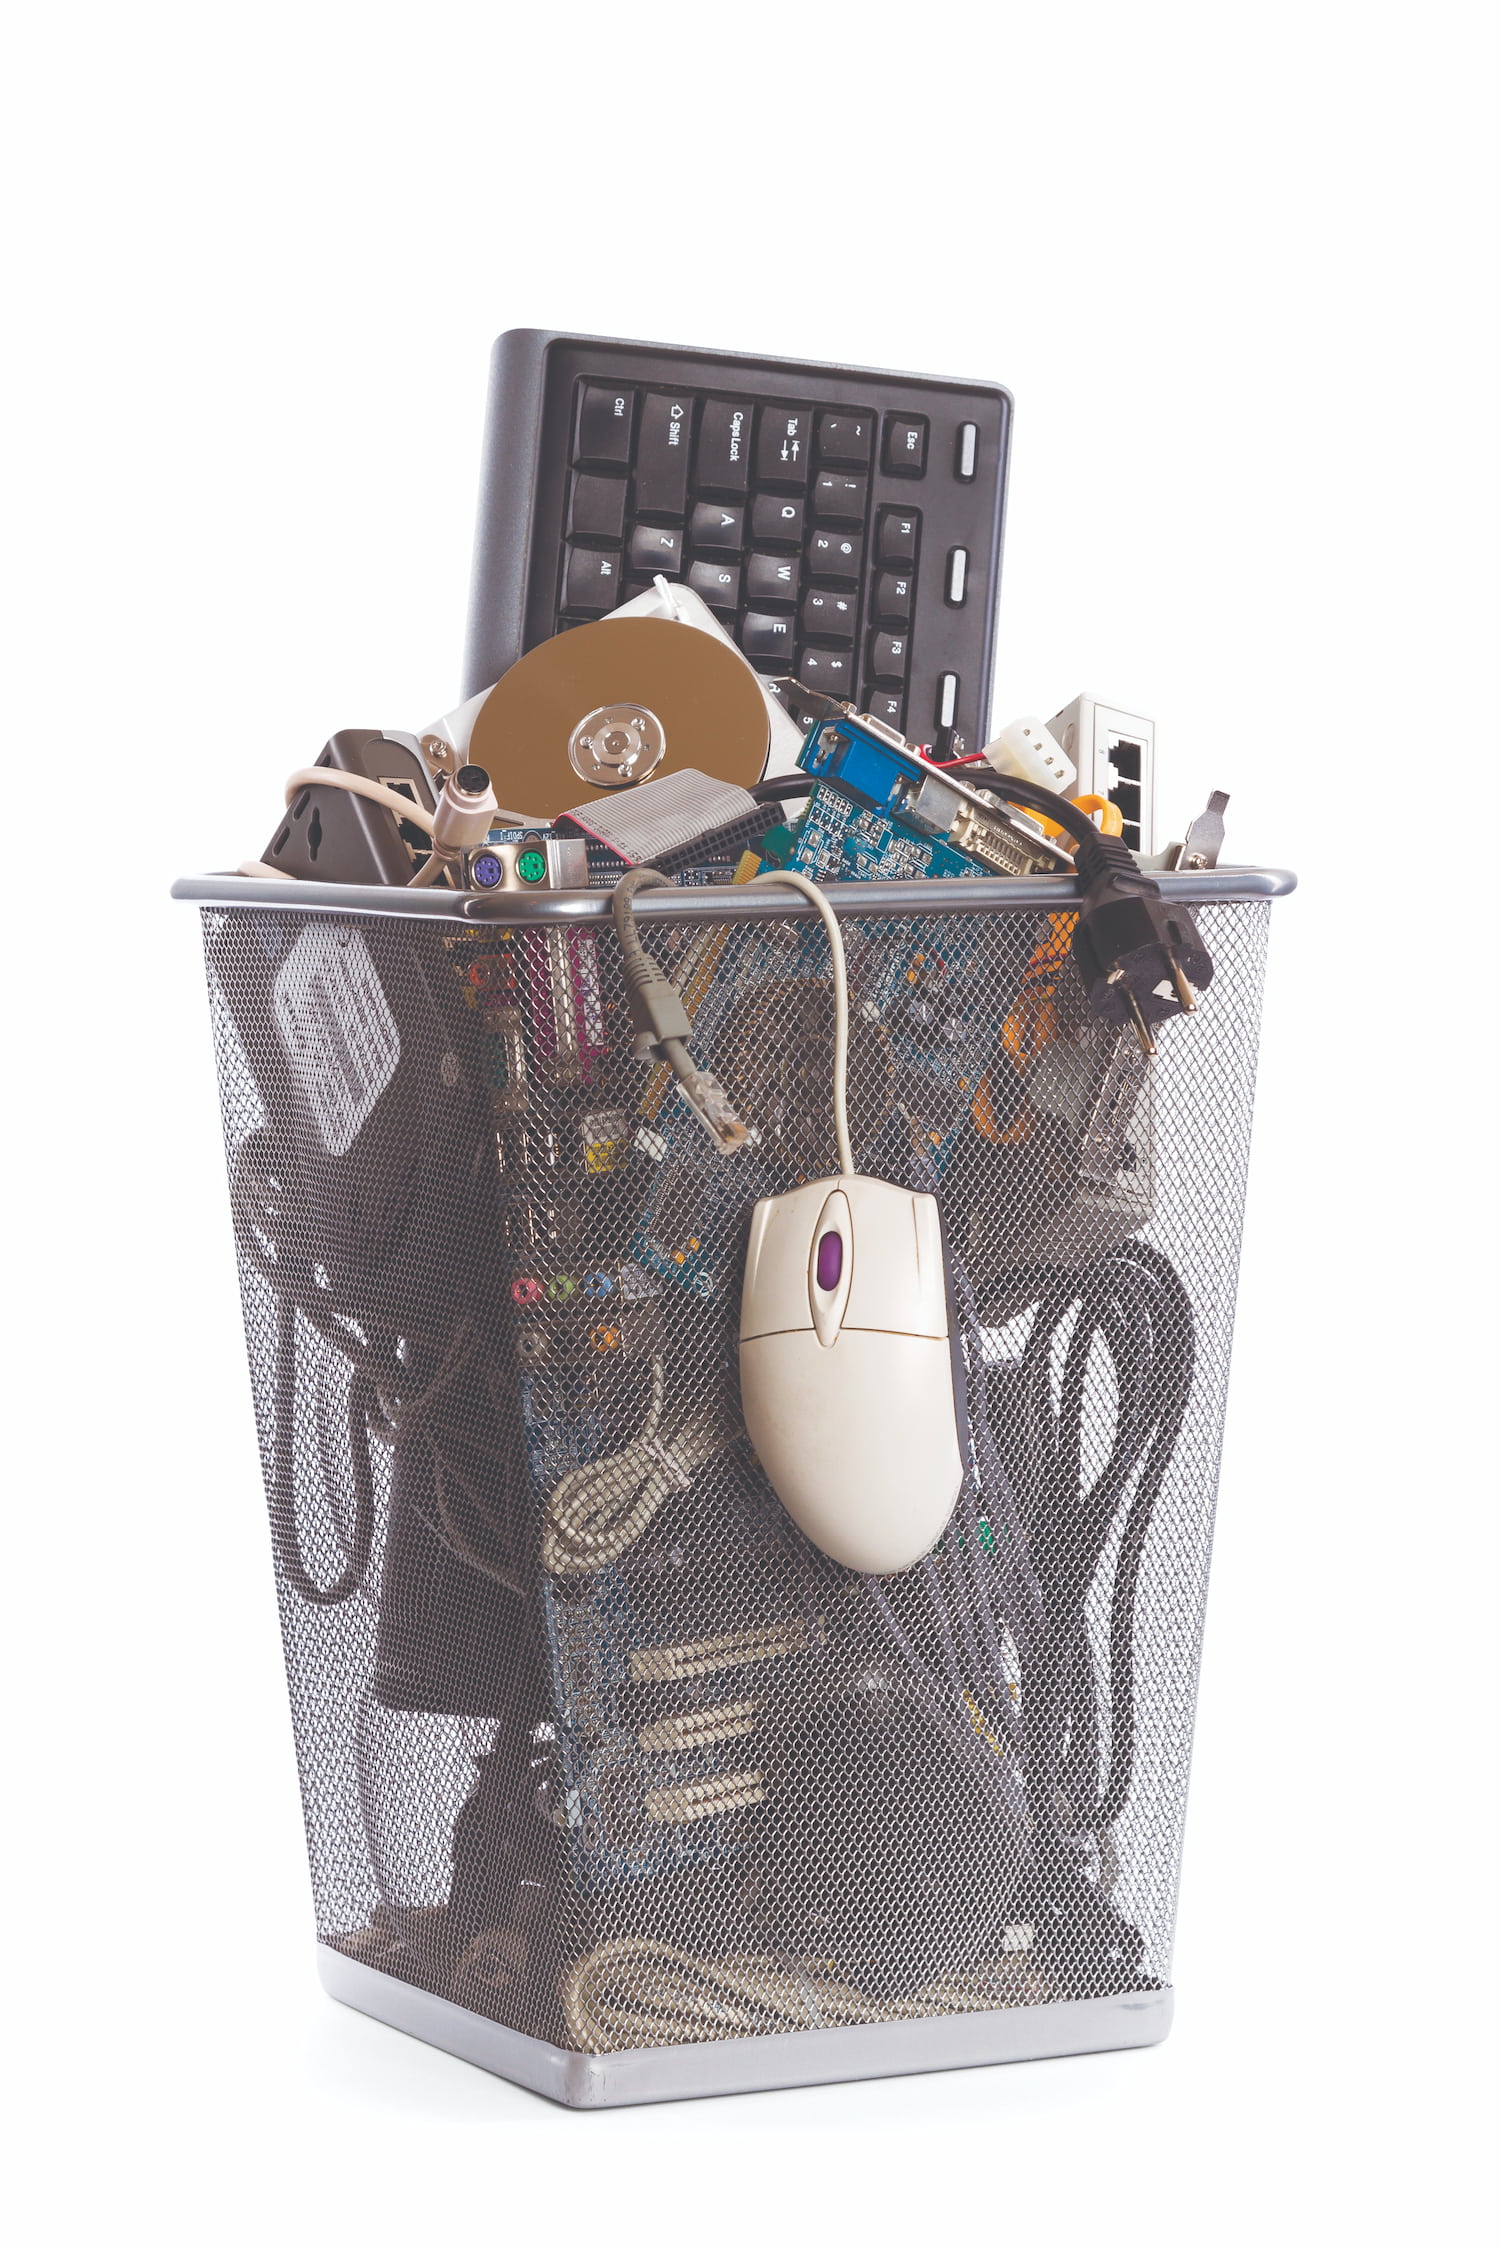 A transparent trash can filled with electronic waste